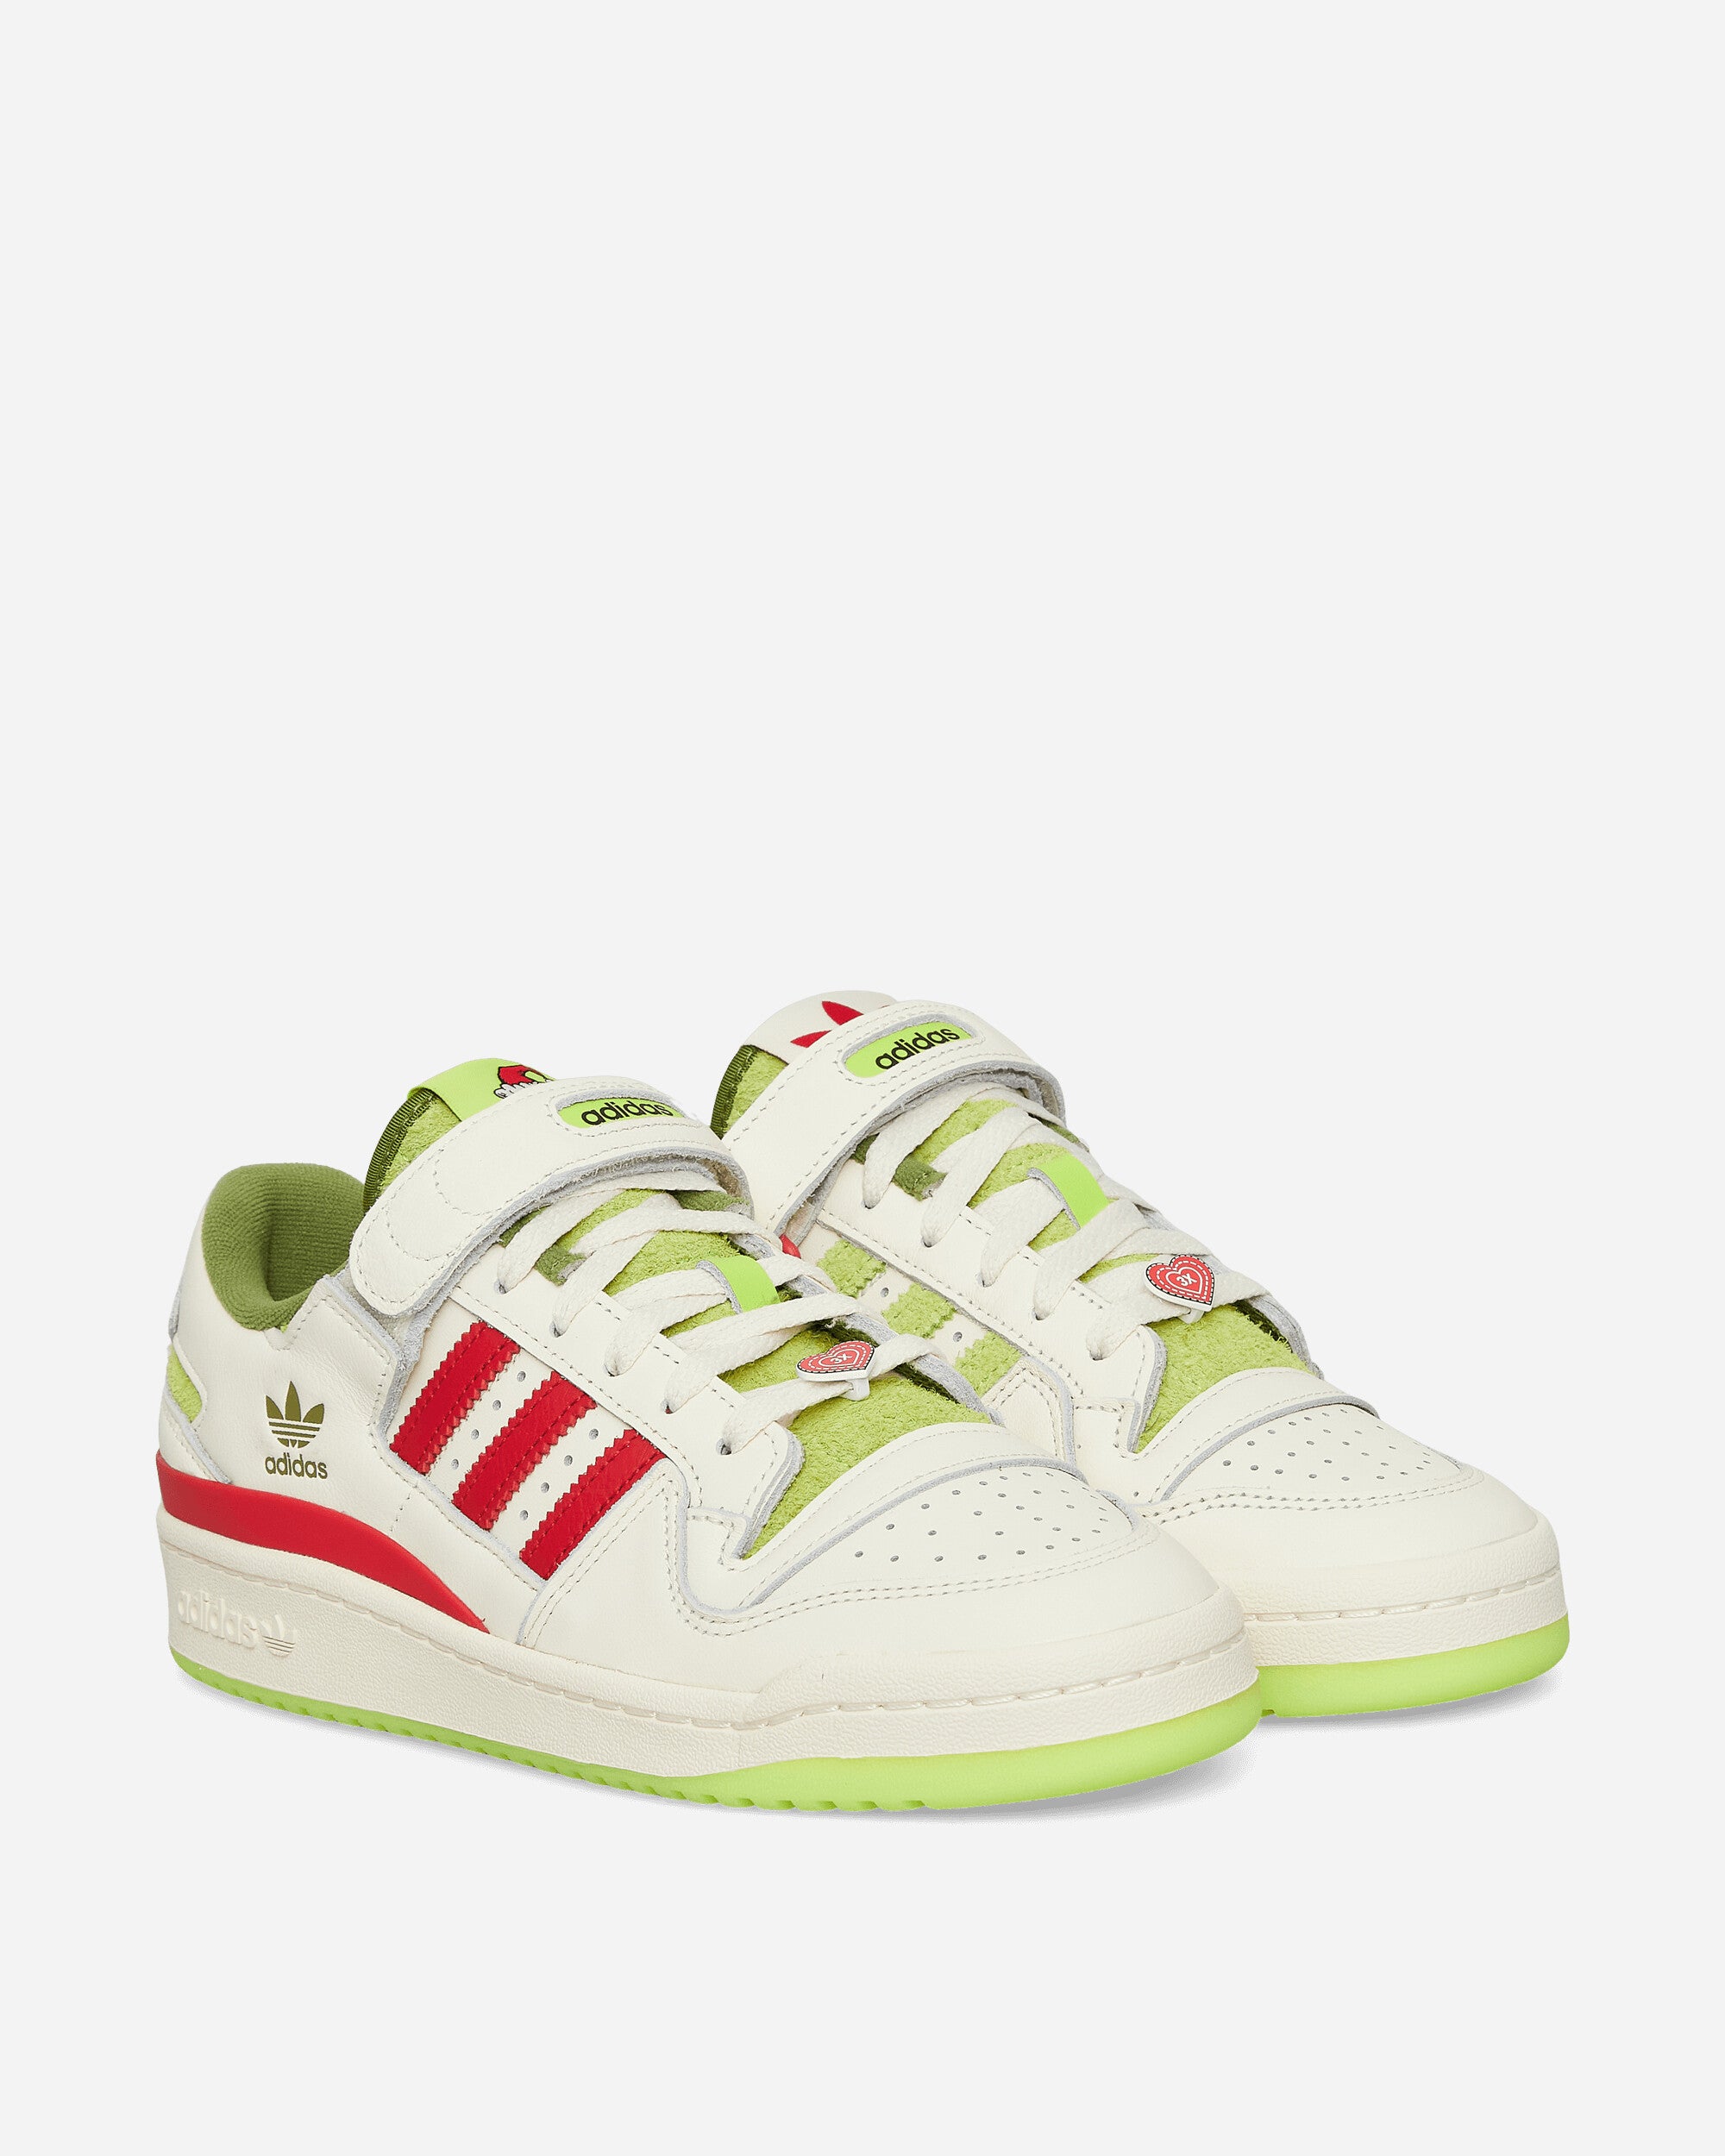 Forum Low The Grinch Sneakers Cream White / Collegiate Red / Solar Slime